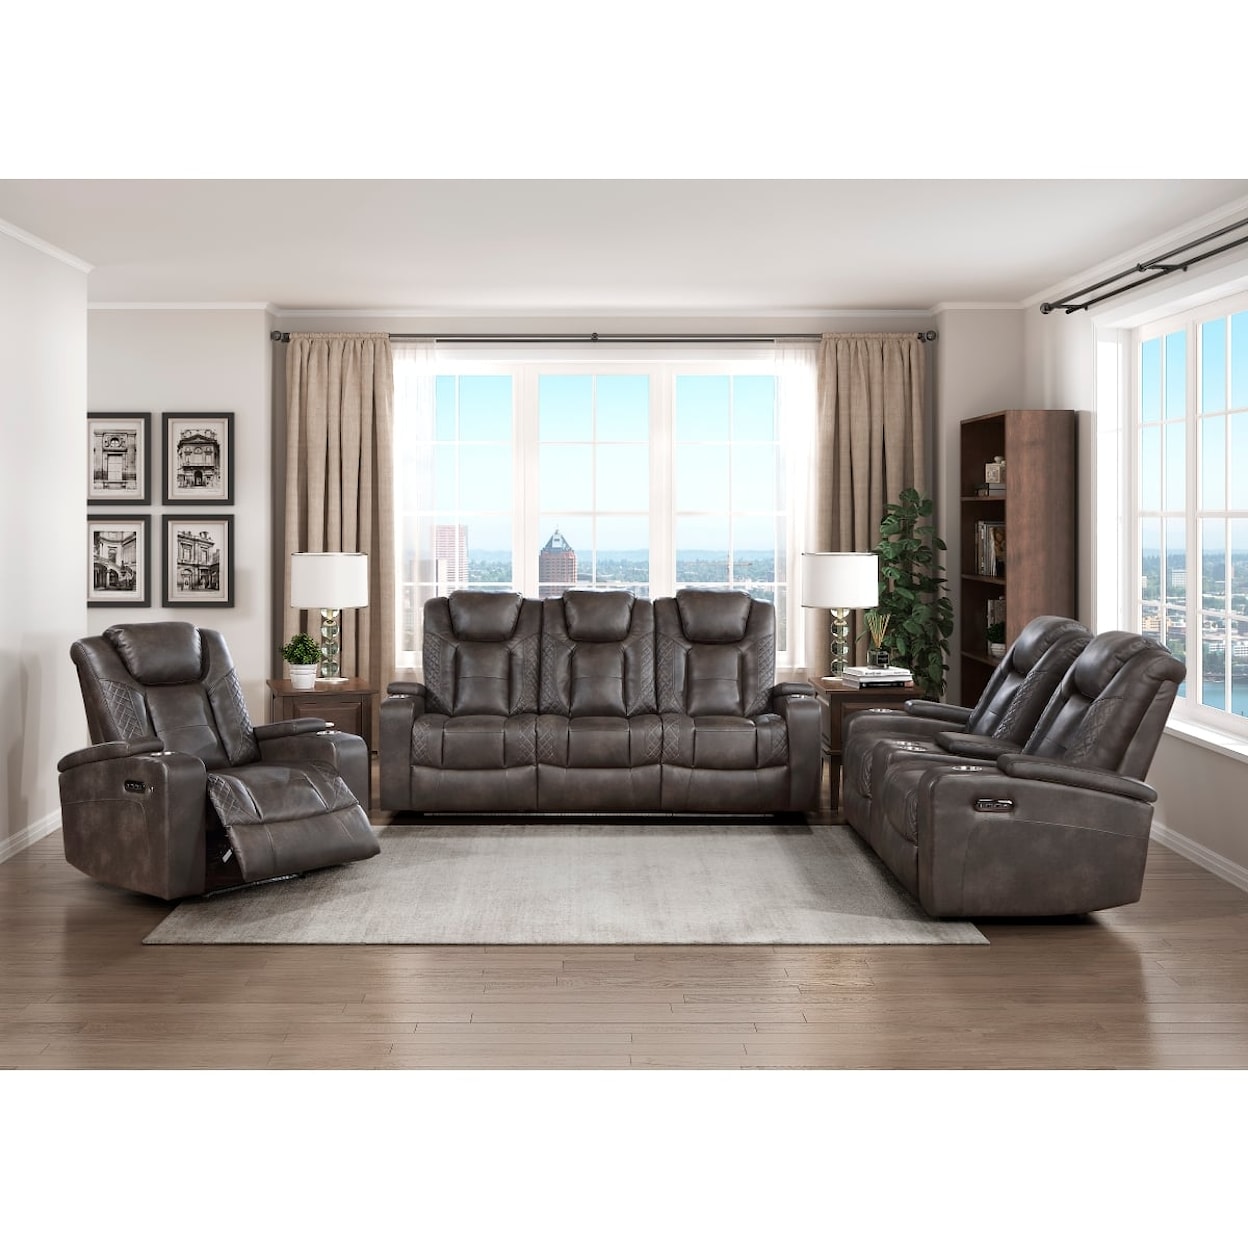 Homelegance Furniture Tabor Double Power Reclining Sofa